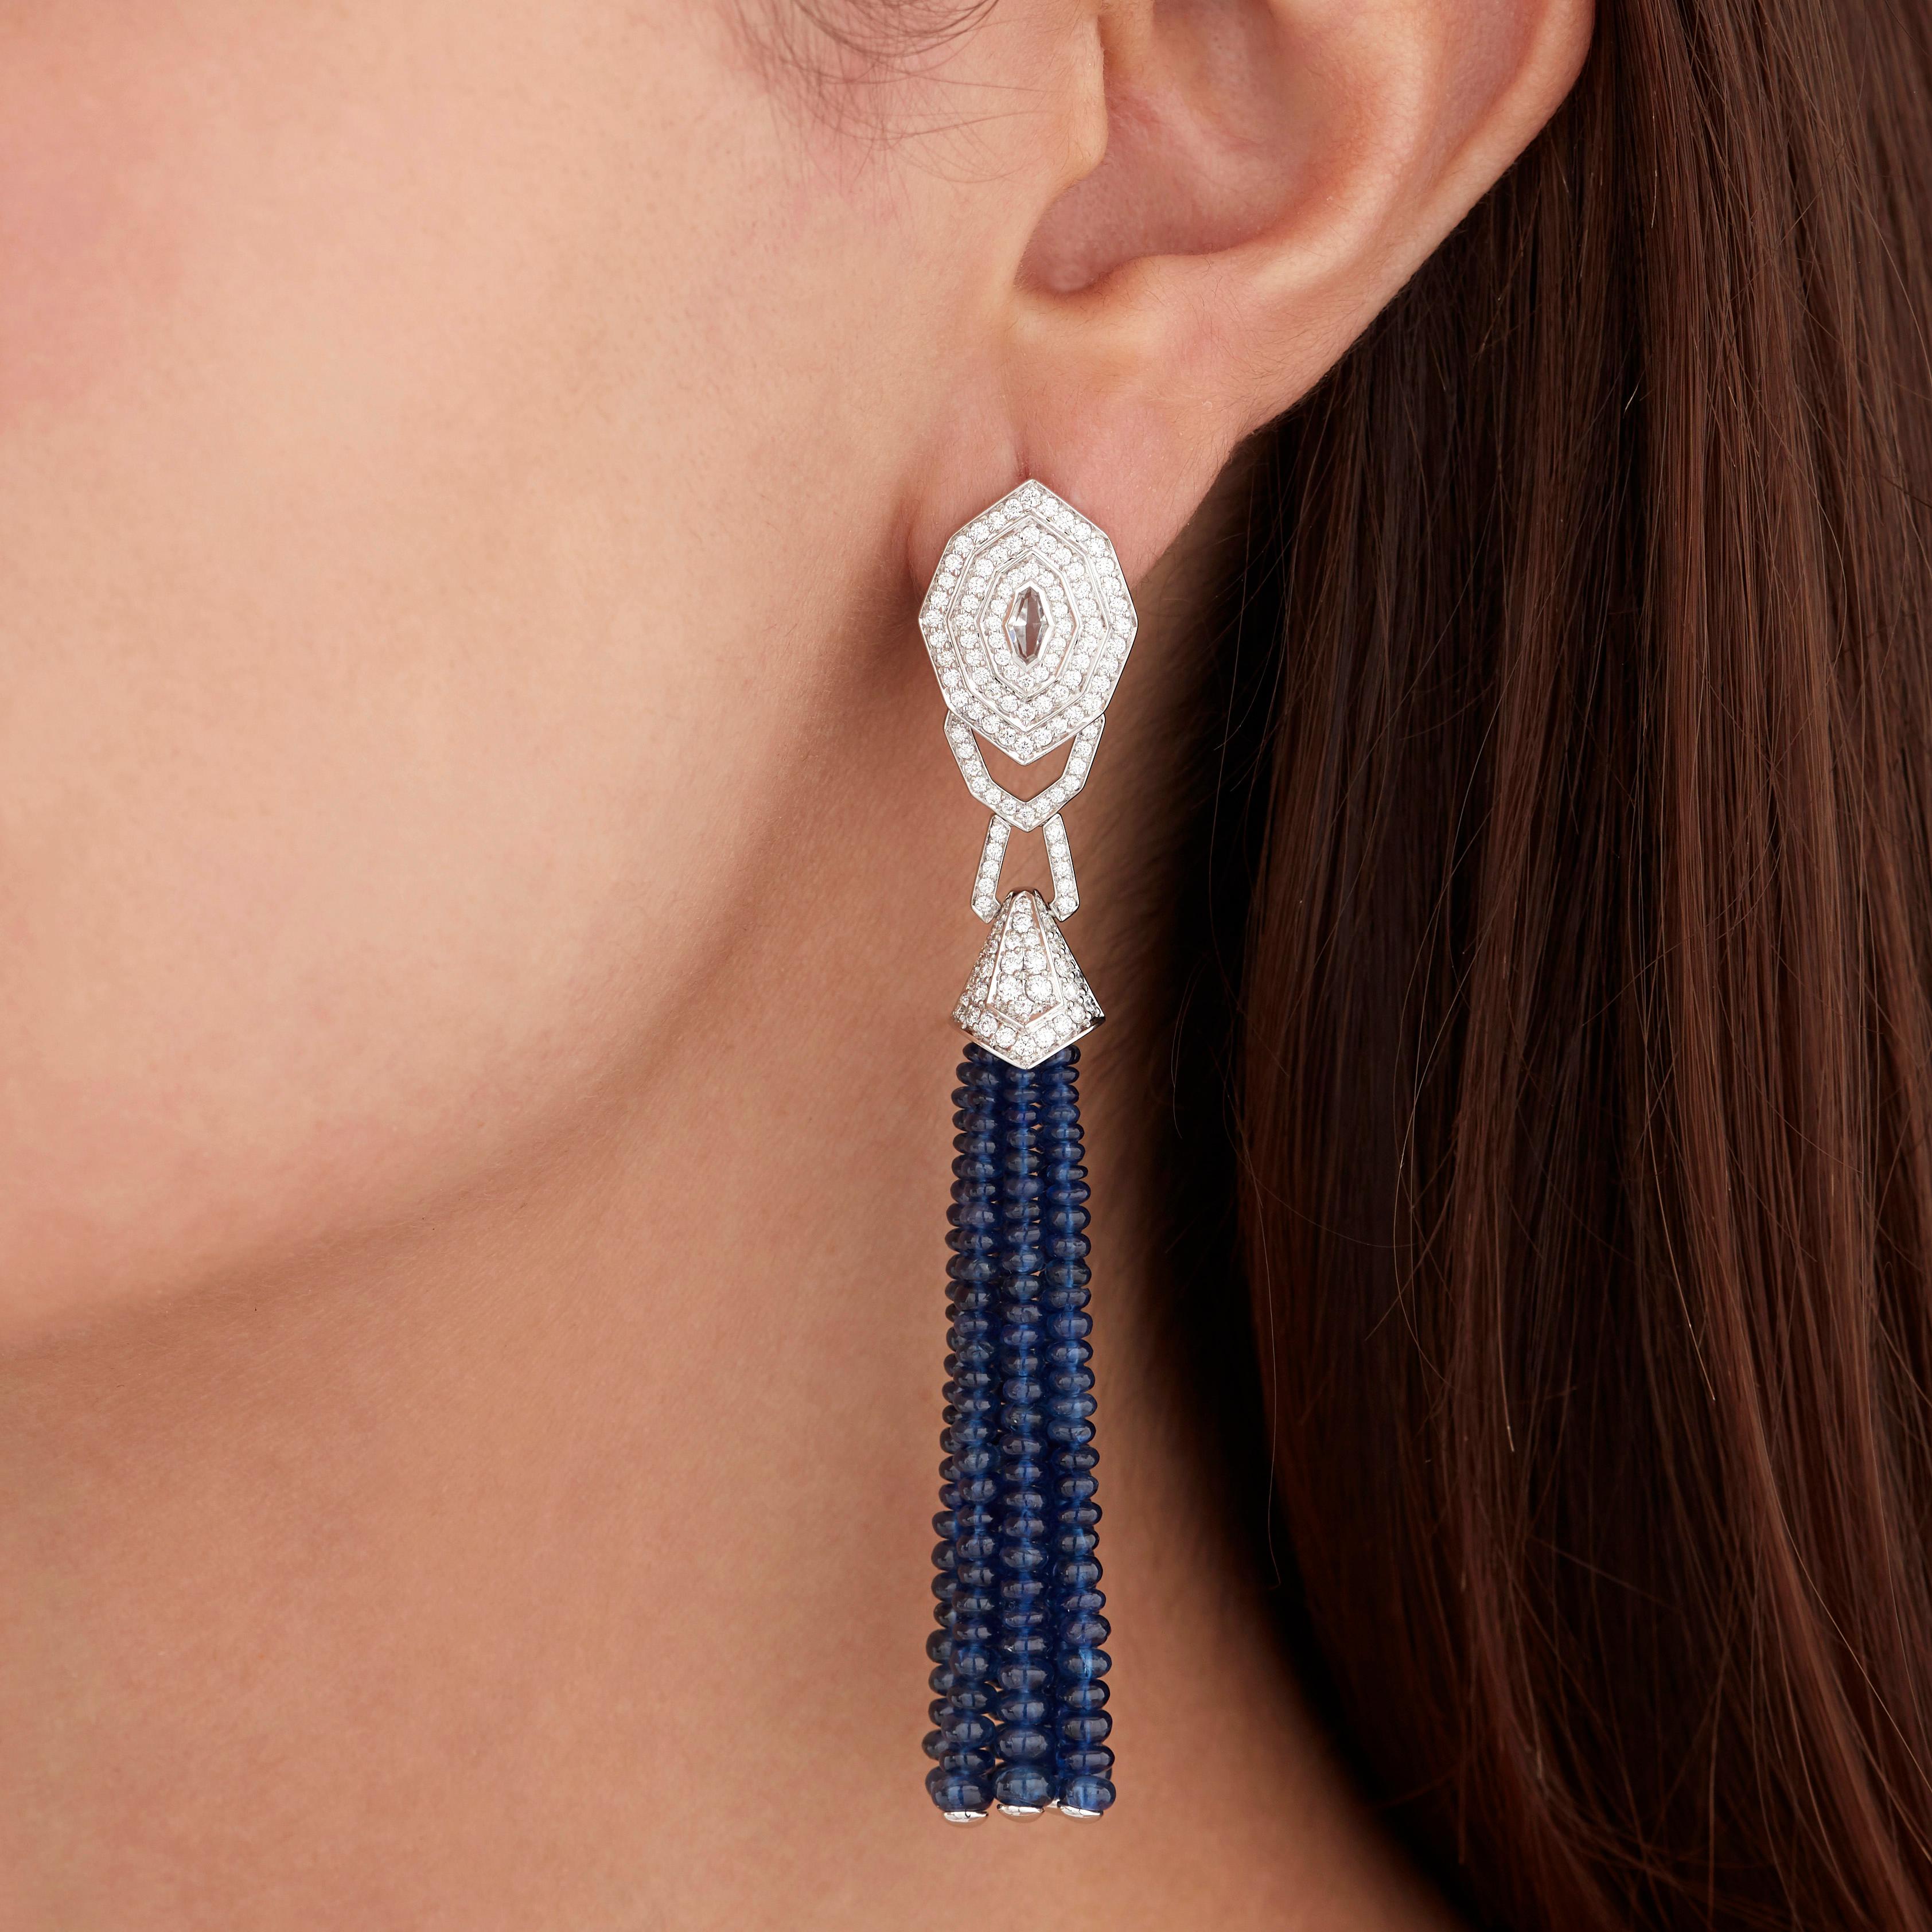 A House of Garrard pair of 18 karat white gold earrings from the Enchanted Palace collection set with rock crystal, round white diamonds and polished sapphire bead tassels.

2 pieces of rock crystal weighing: 0.19cts
14 strands of polished sapphire